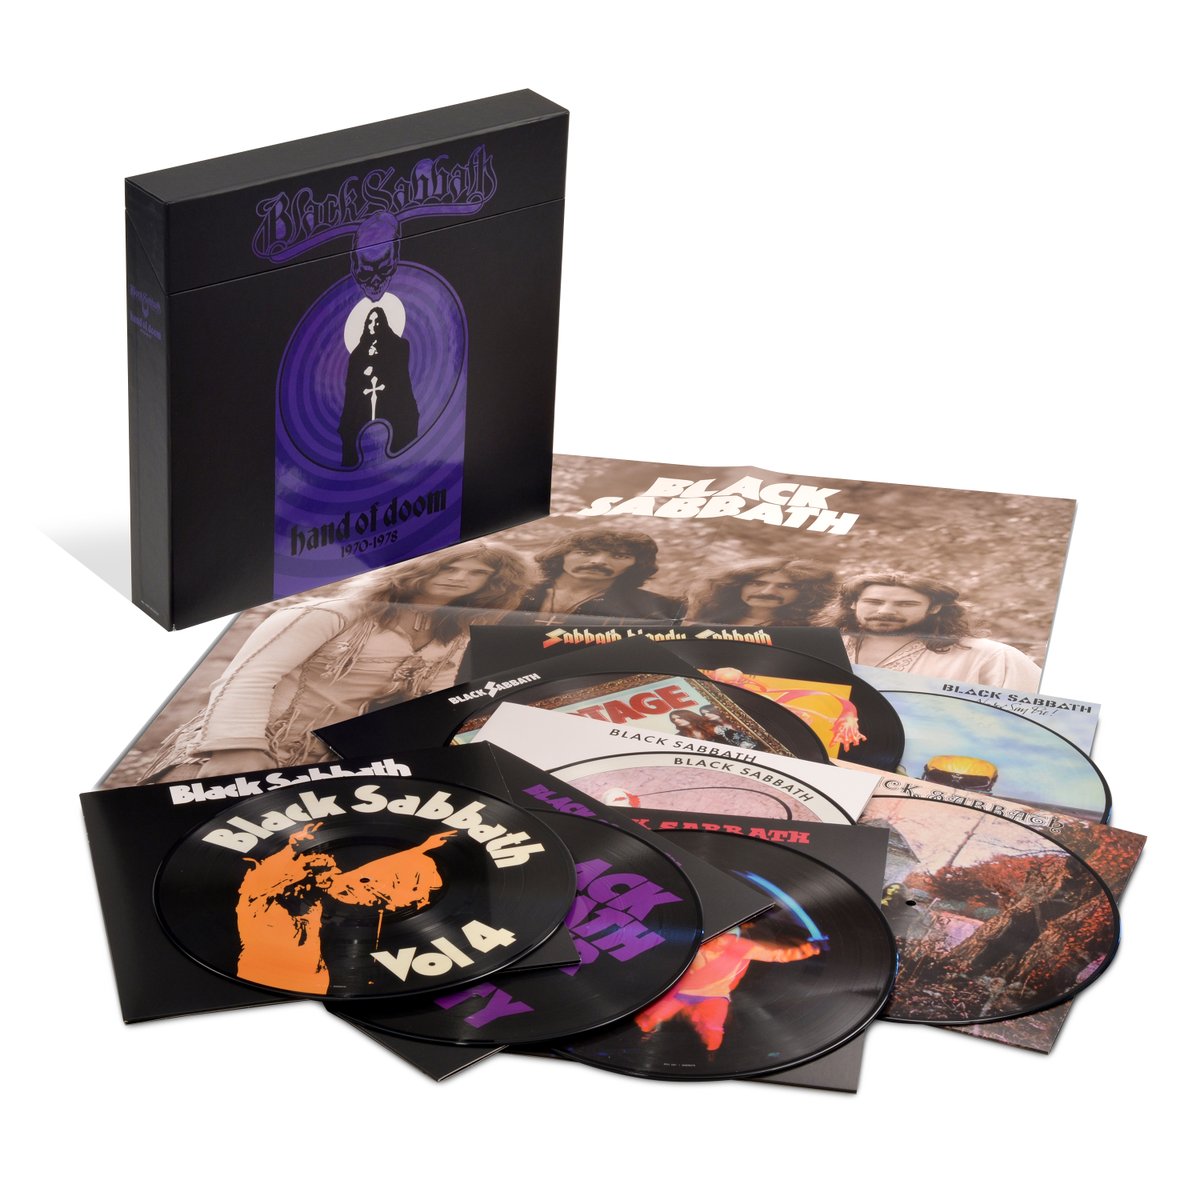 “Hand of Doom 1970 – 1978 (Picture Disc Boxed Set)' is now available to pre-order from @Rhino_Records. Exclusive to the US & limited to 4,000 copies, this set contains the first 8 @BlackSabbath LPs as picture discs. Releases 18 Aug 2023. Pre-Order here: lnk.to/BS-HOD